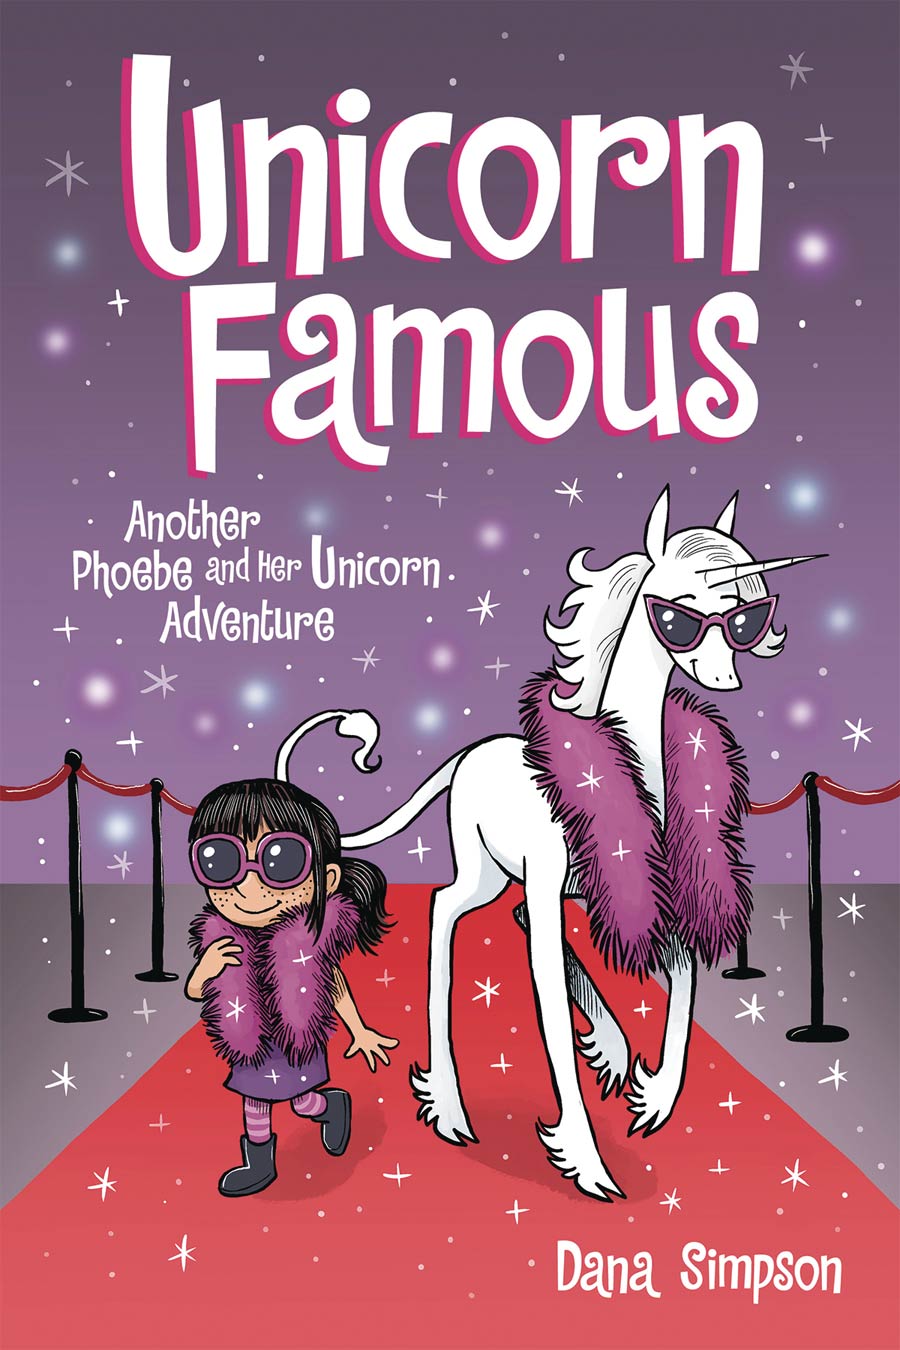 Phoebe And Her Unicorn Vol 13 Unicorn Famous GN